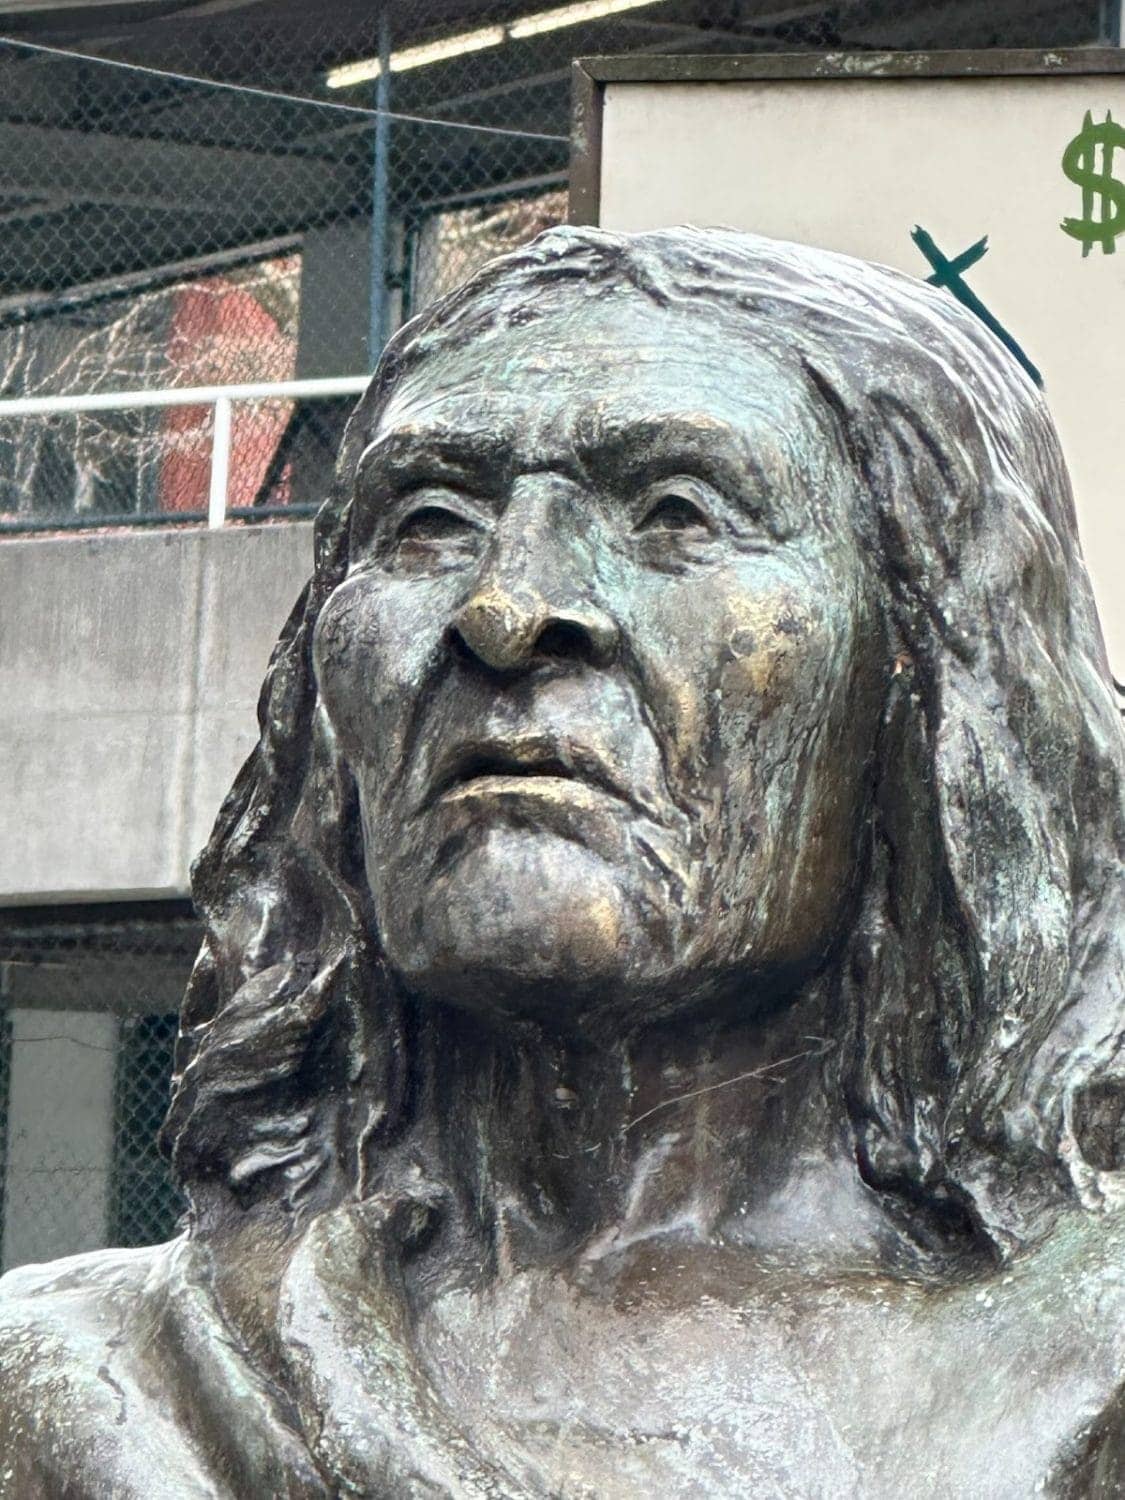 Chief-Siahl-in-pioneer-square, Us houseless folks can build our own solution to homelessness!, Local News & Views News & Views 